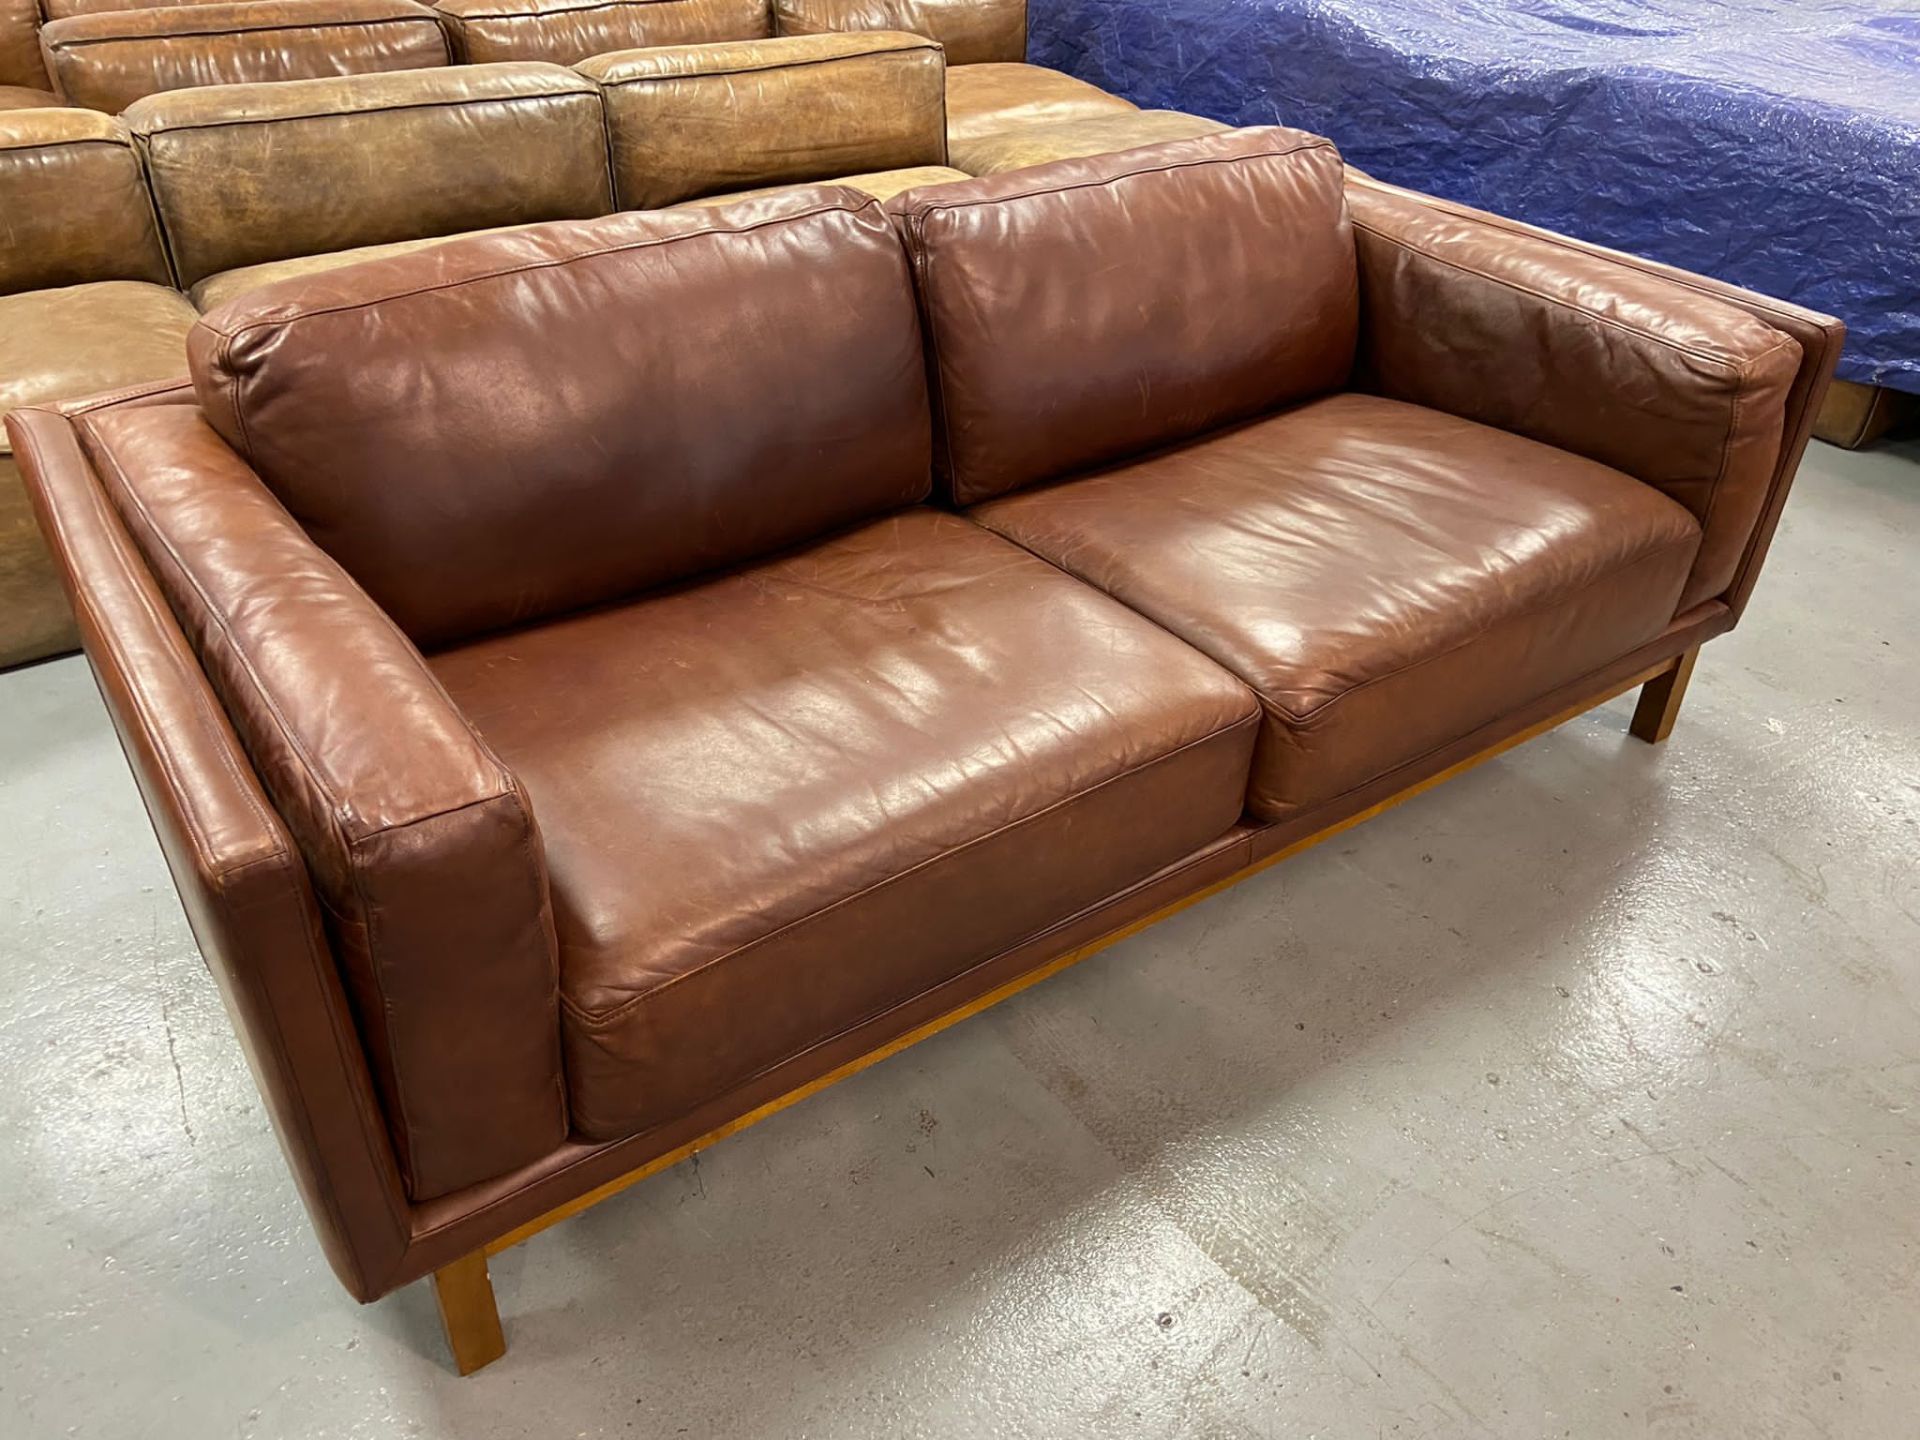 1 x West Elm Dekalb Contemporary Three Seater Sofa - Upholstered in Quality Tan Leather With Oak Fee